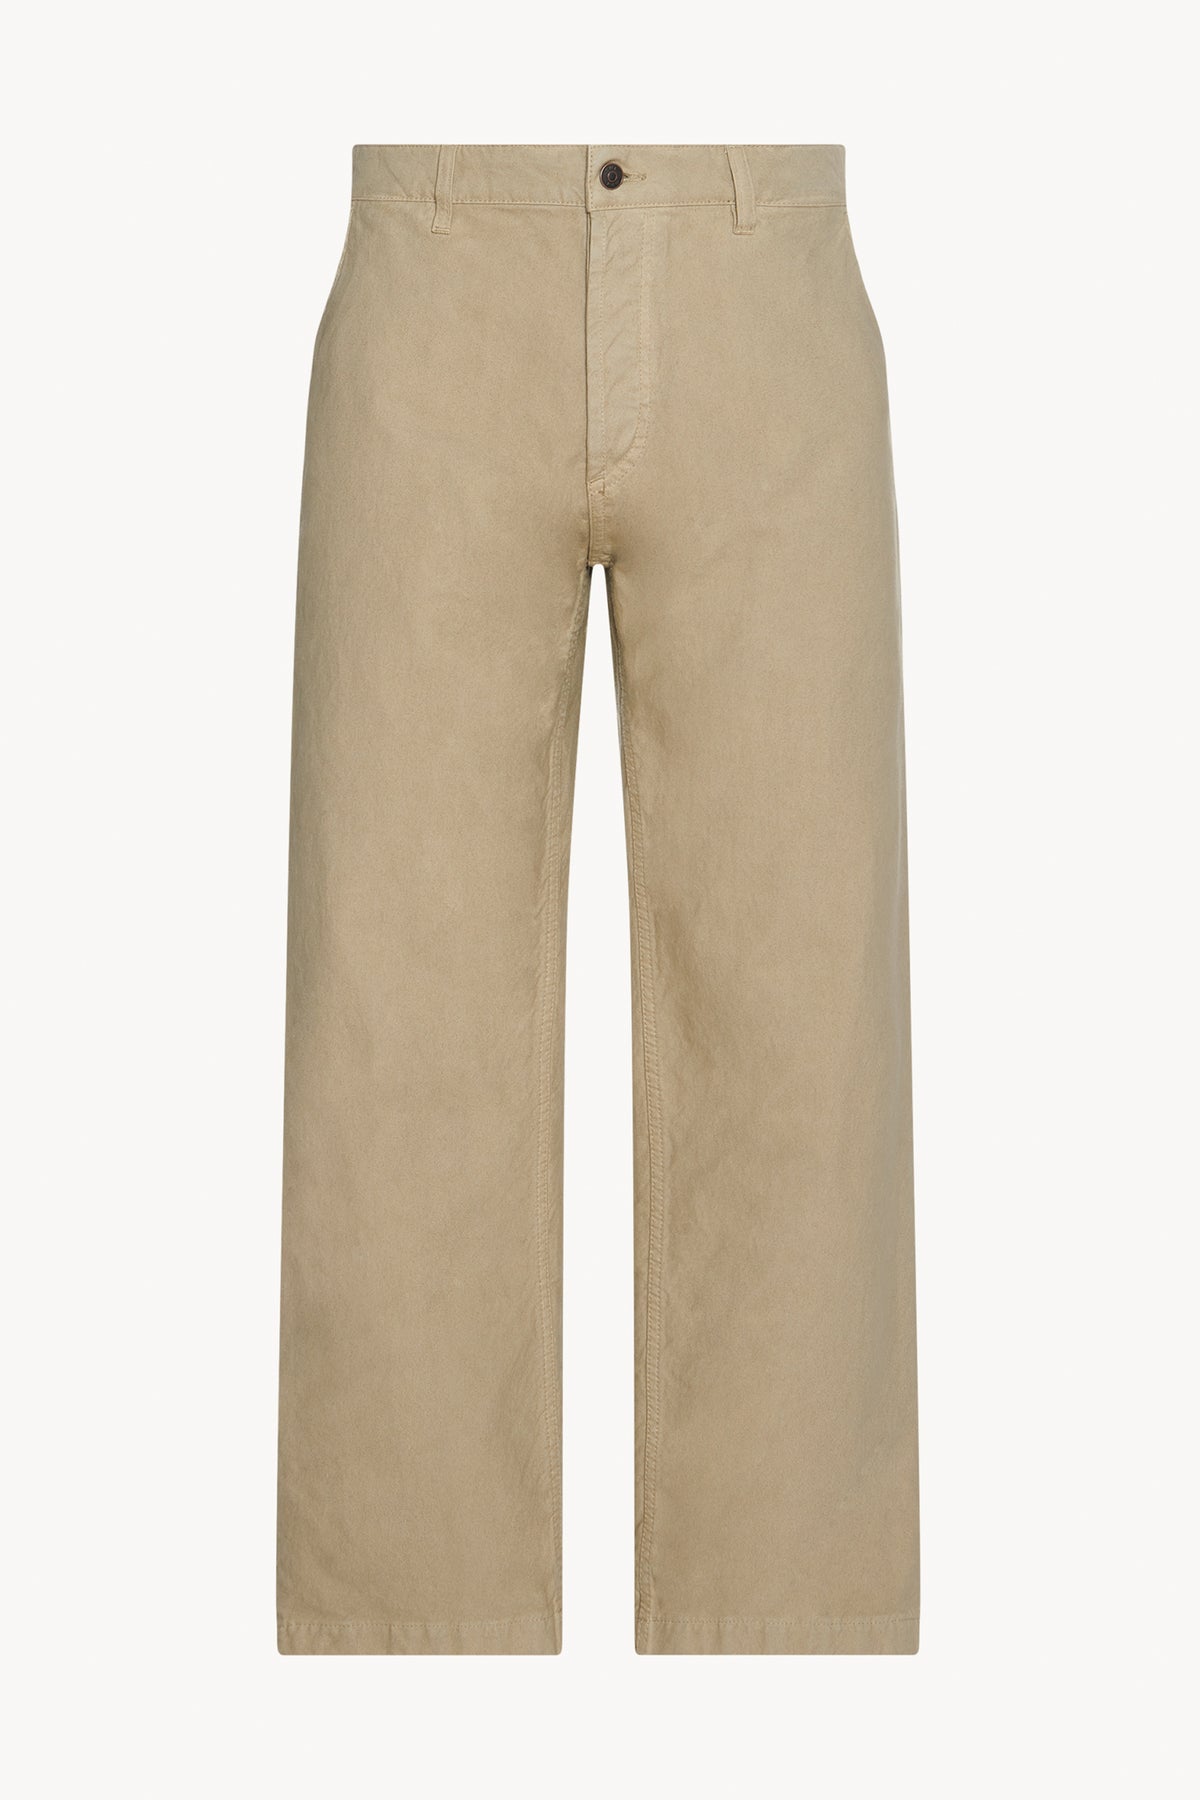 Riggs Pant in Cotton